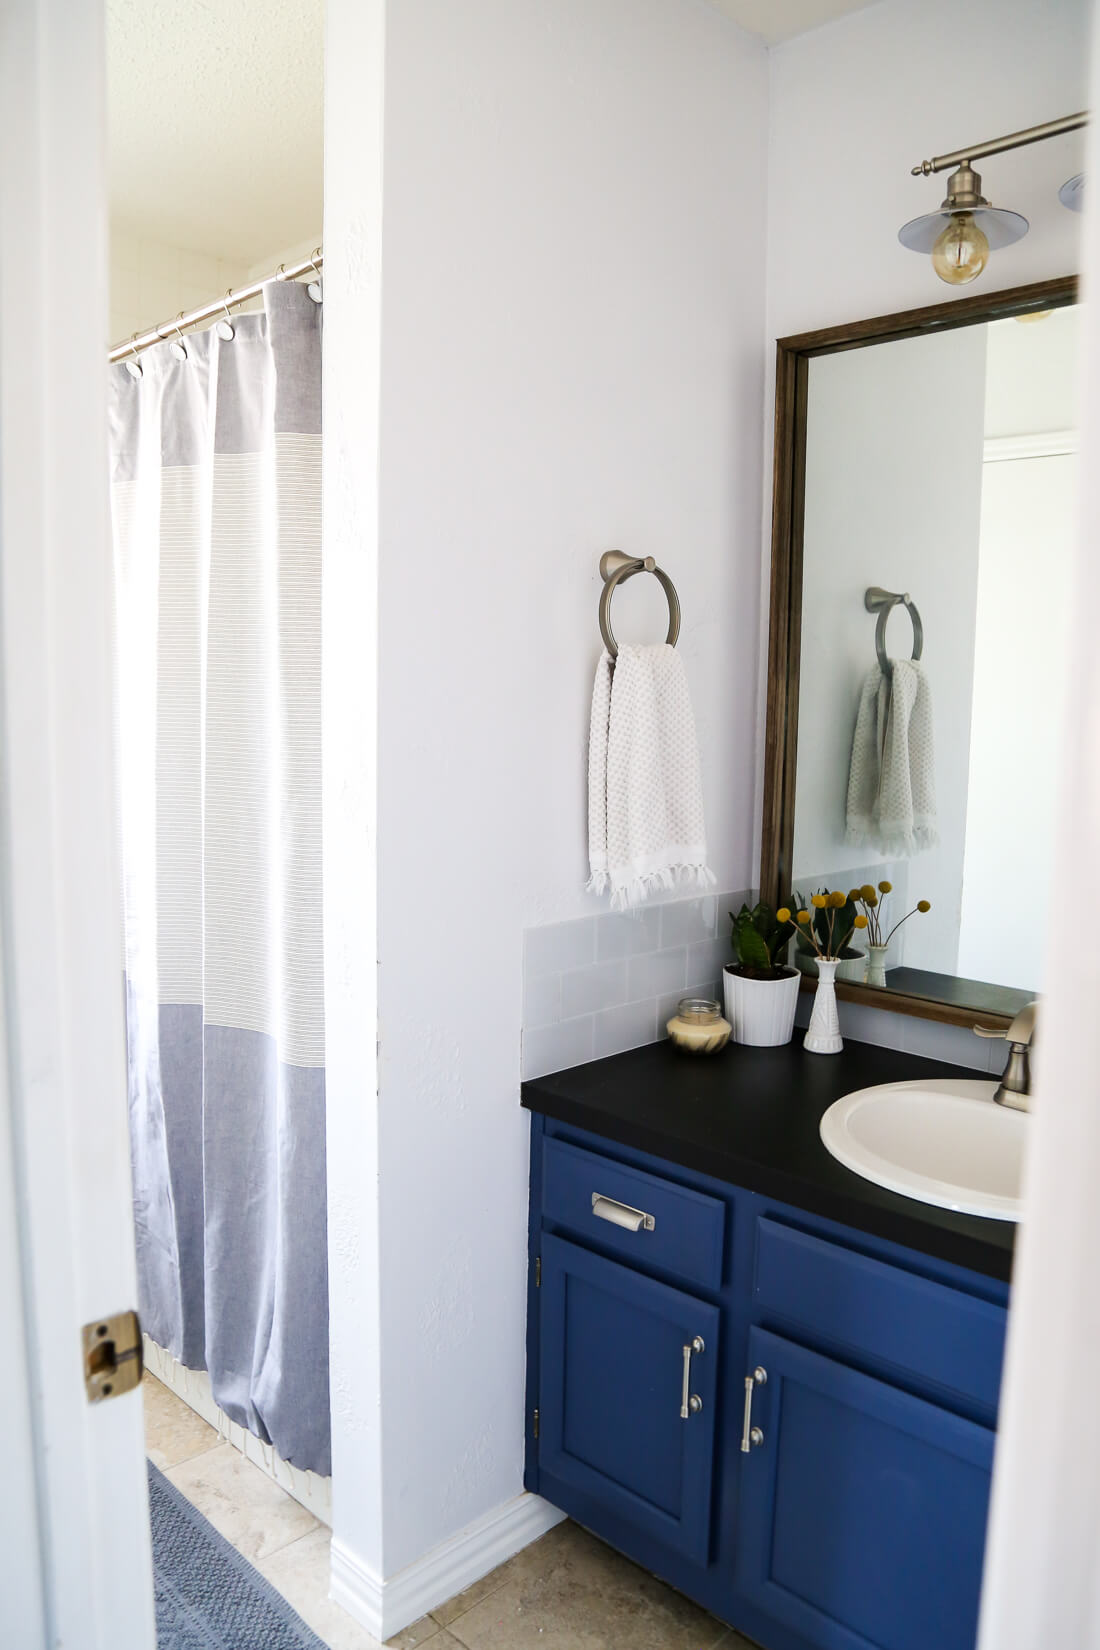 Bathroom updates you can make in a weekend 